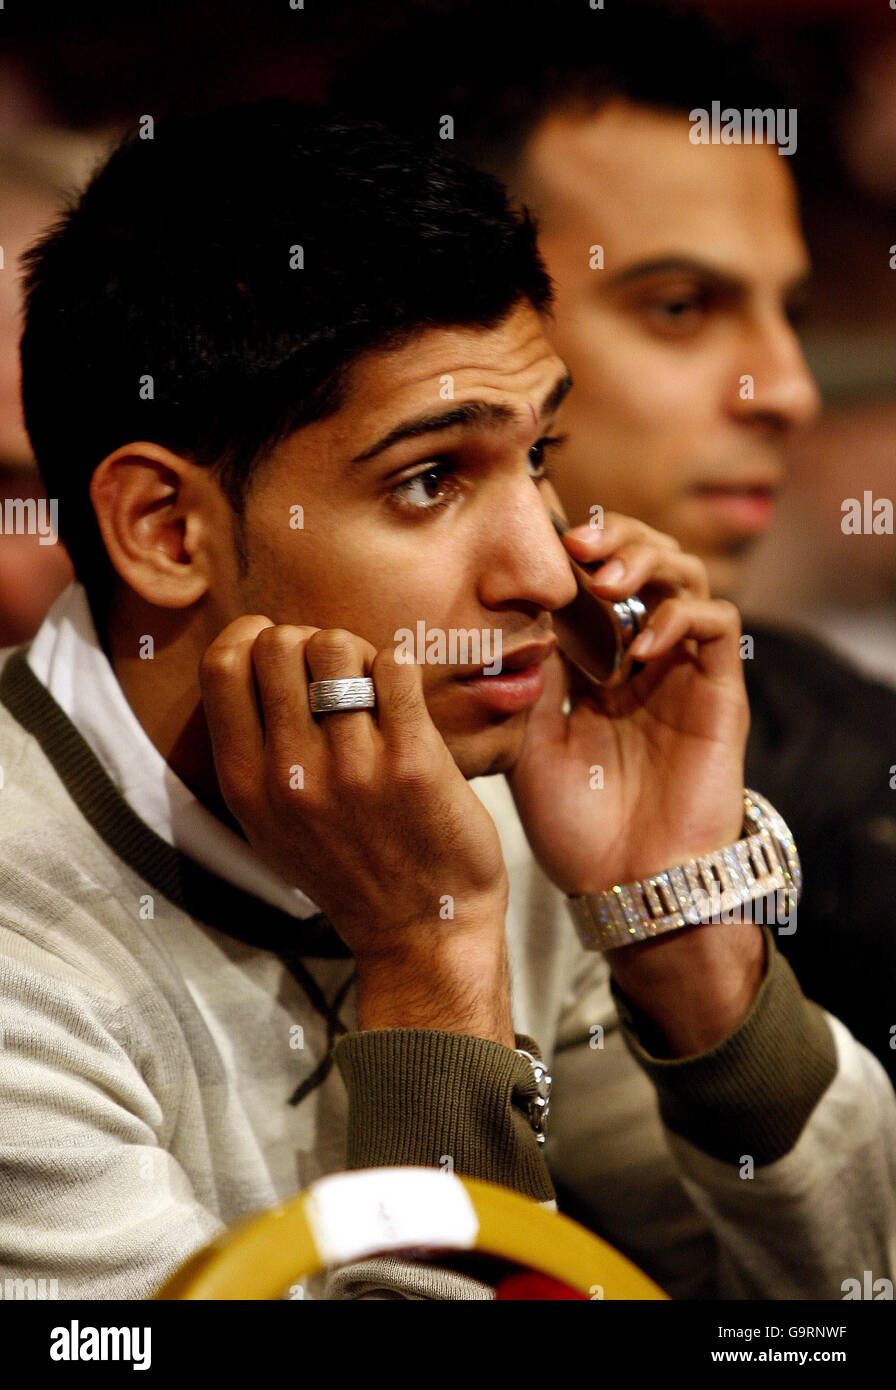 British boxer Amir Khan at the Liverpool Olympia during an evening of boxing which includes the WBU featherweight title fight between Derry Matthews and John Simpson Stock Photo